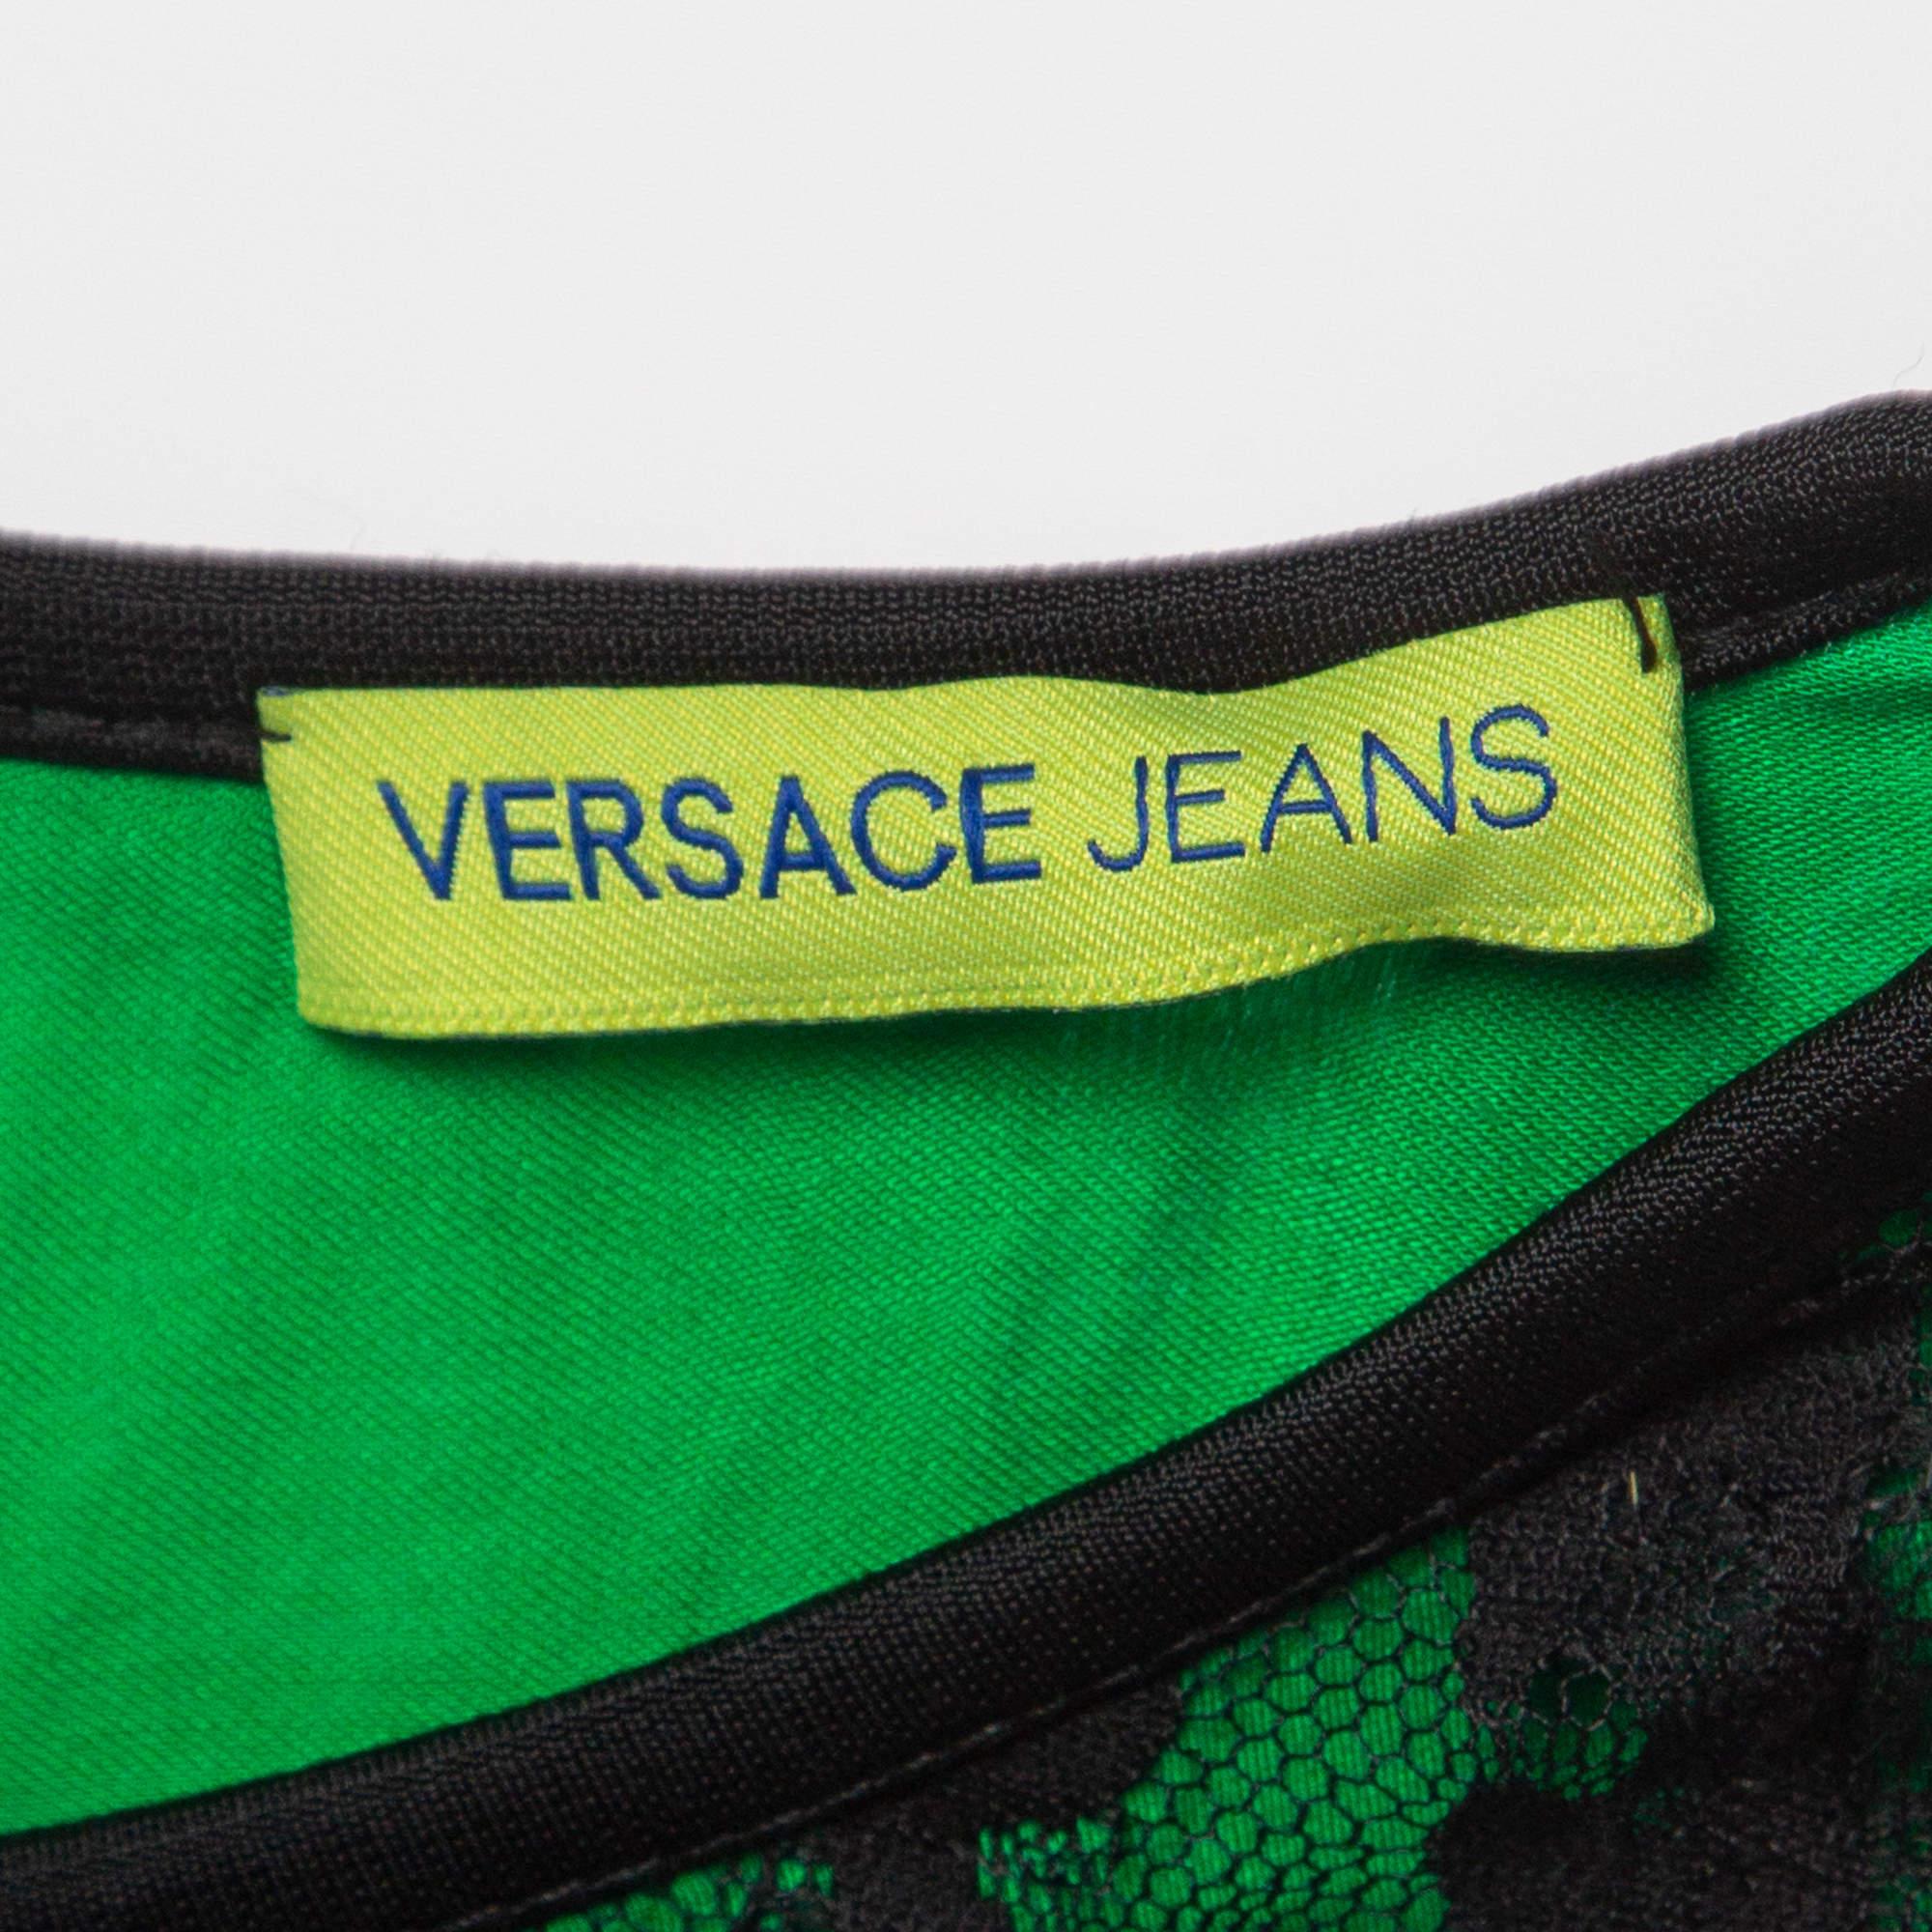 Versace Jeans Black/Green Lace Overlay Sleeveless Short Dress M In Excellent Condition For Sale In Dubai, Al Qouz 2